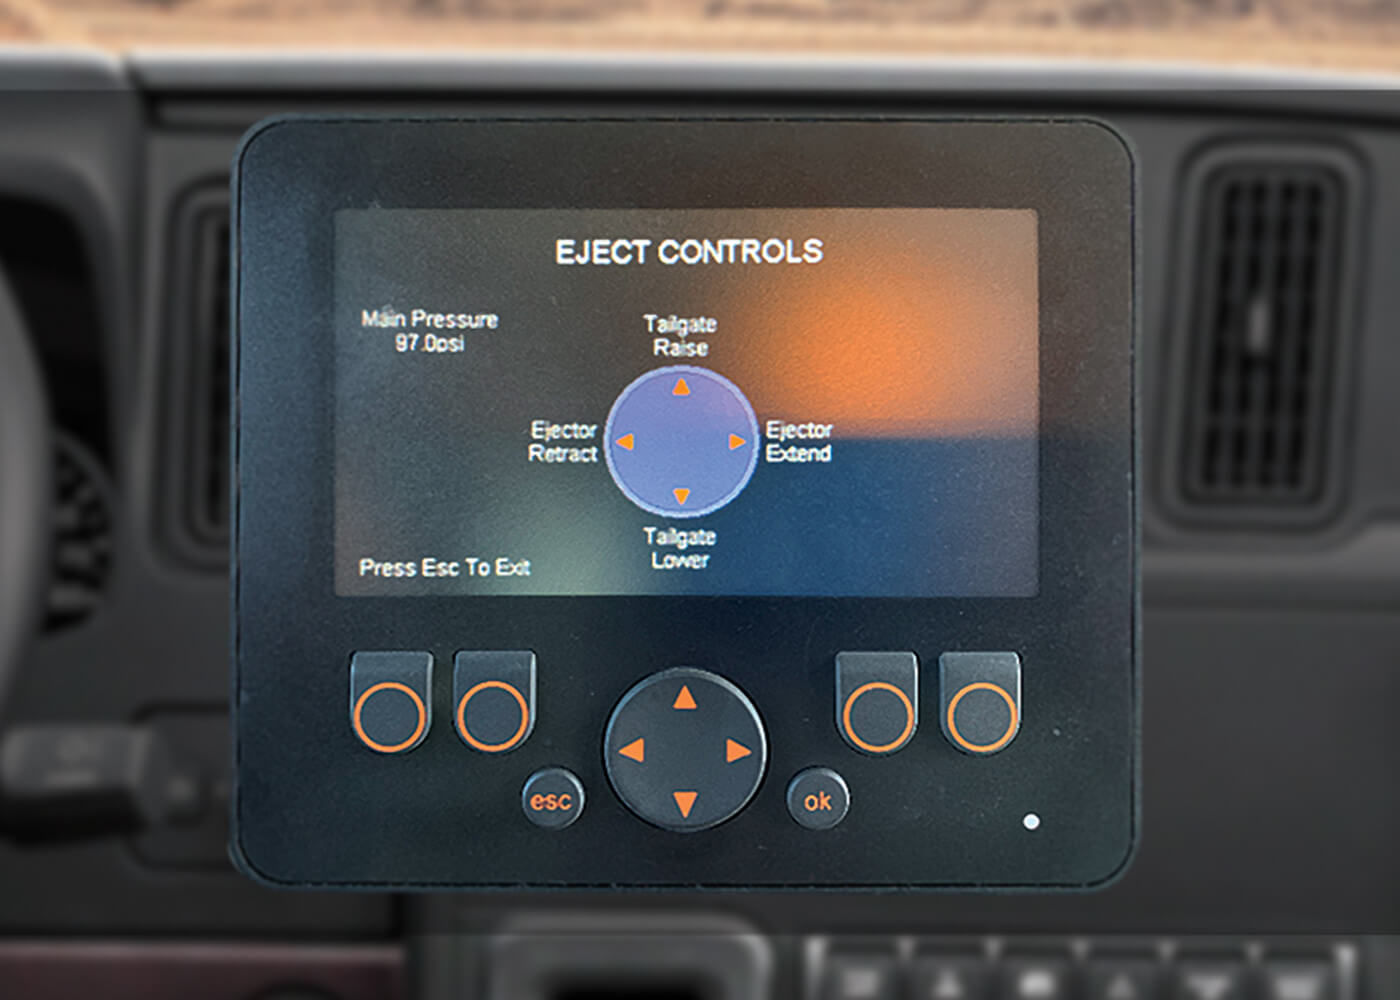 PT1100 in cab rearload payload ejection control panel